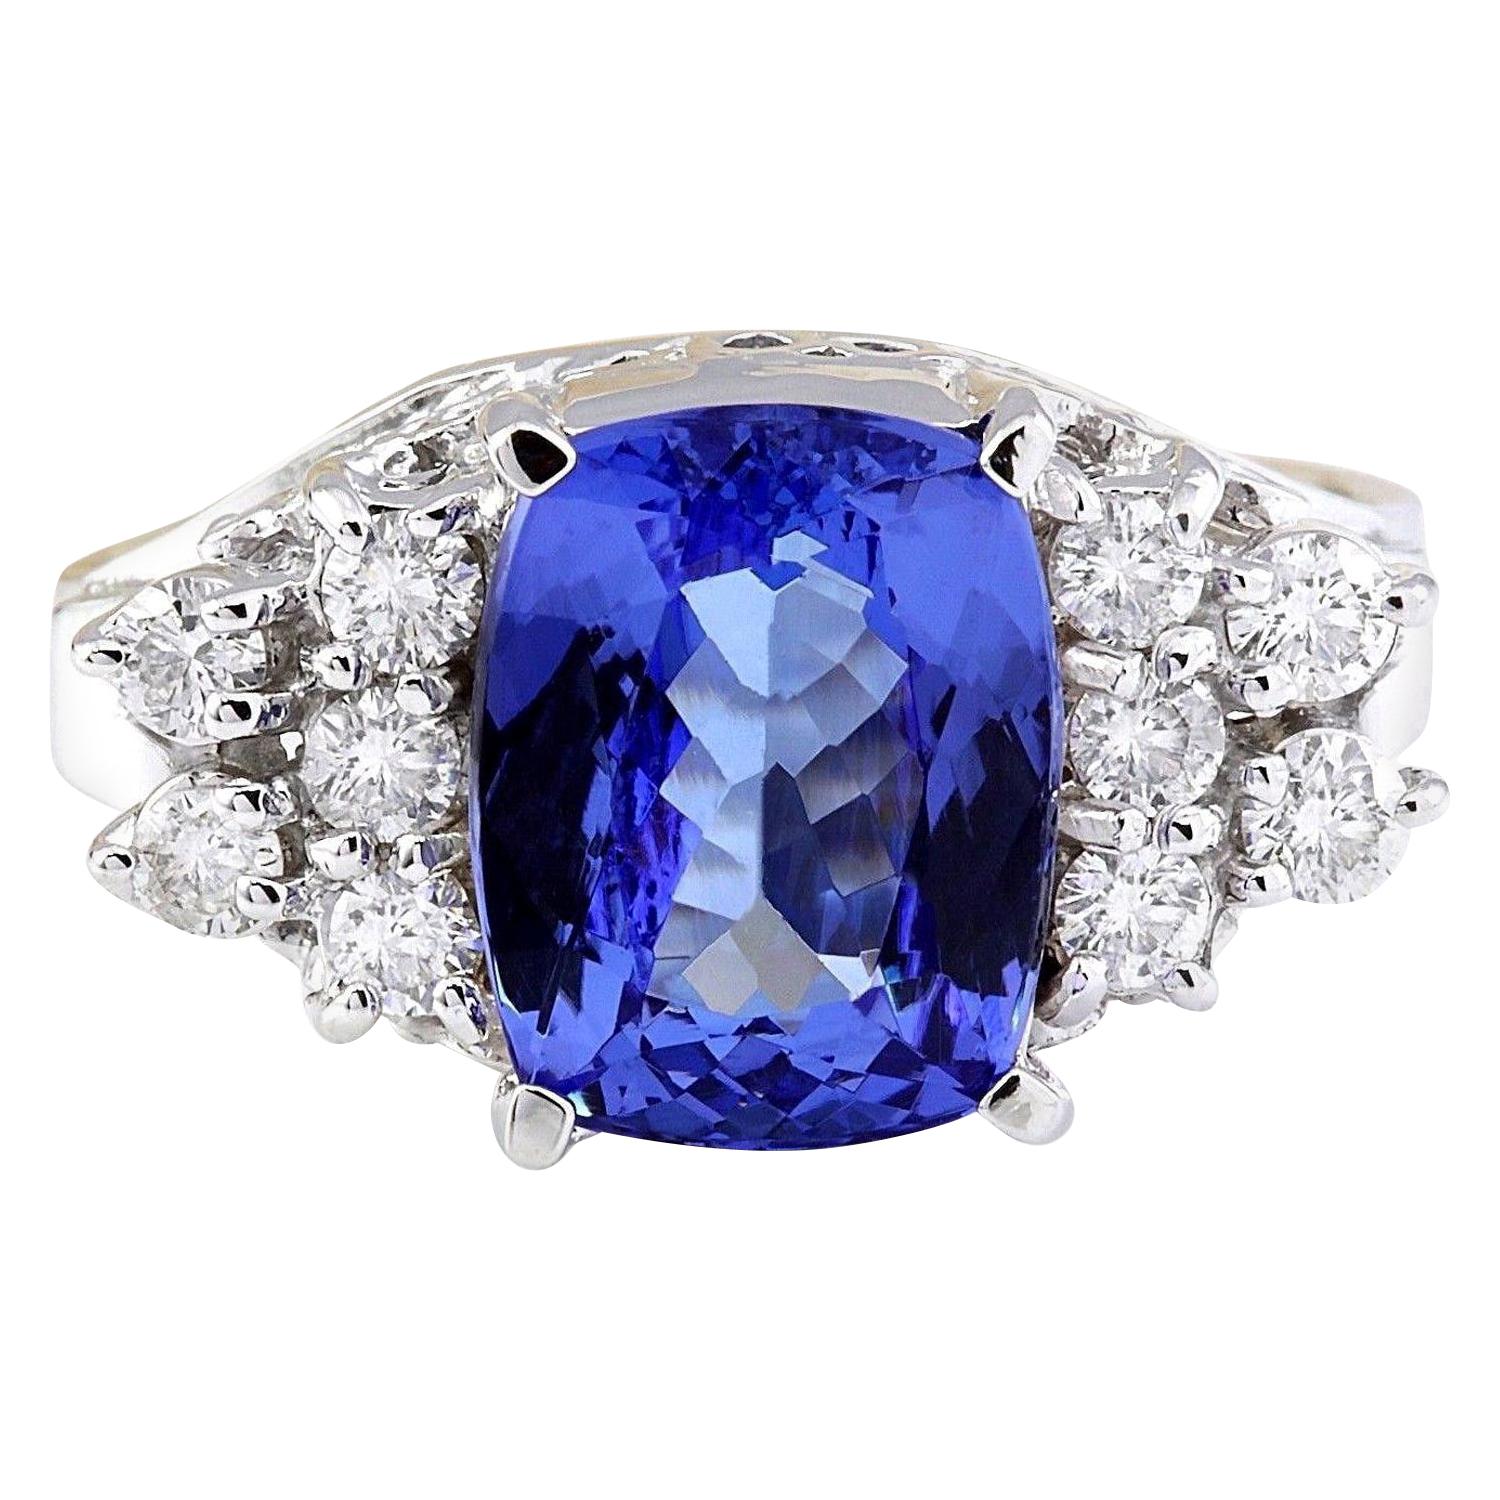 Exquisite Natural Tanzanite Diamond Ring In 14K Solid White Gold 